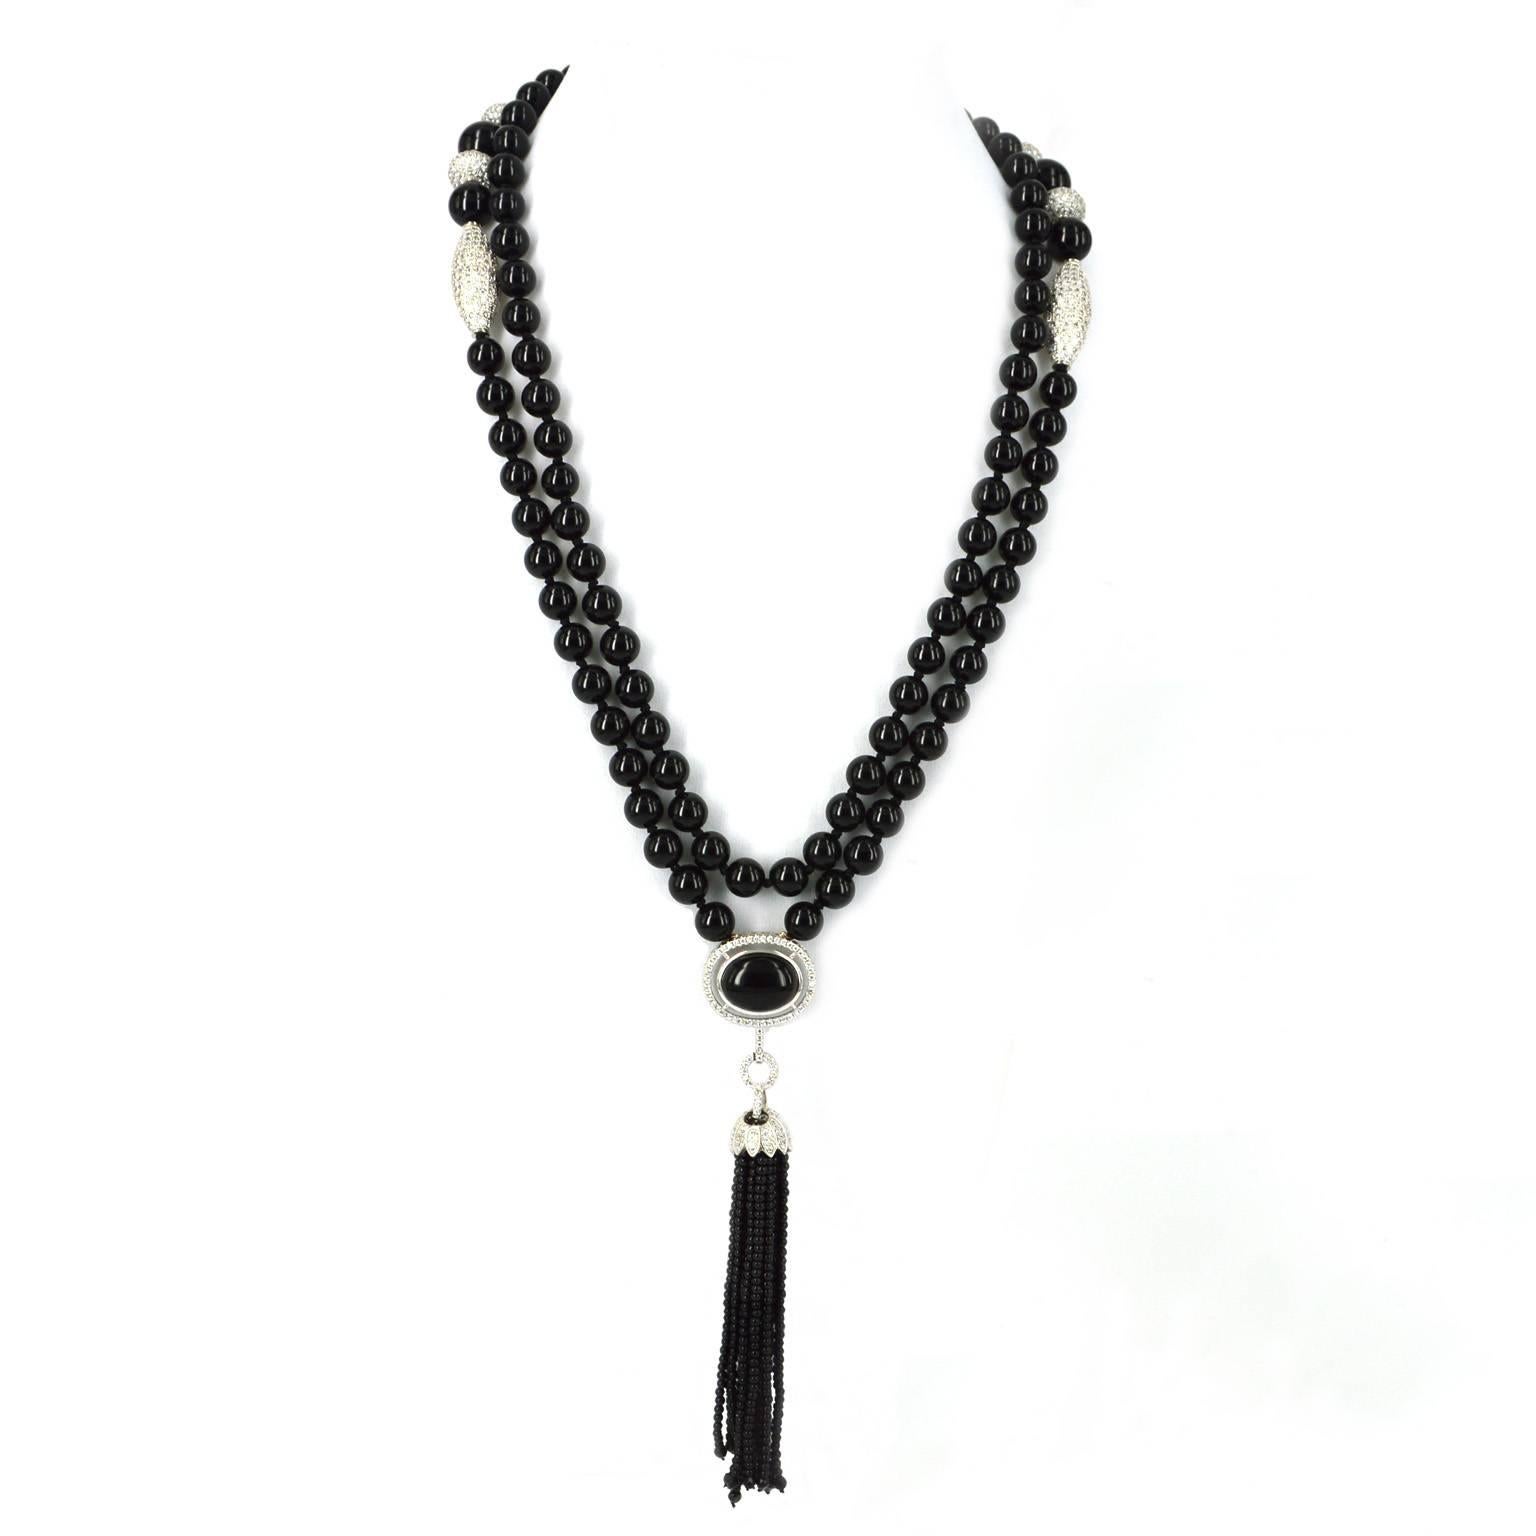 Art Deco inspired long necklace.
8mm round polished Onyx and Rhodium plated CZ beads. Hand made onyx tassel made from 2mm polished round onyx. A stunning Onyx and CZ feature above the tassel. Tassel length 90mm from cap.
Total necklace length